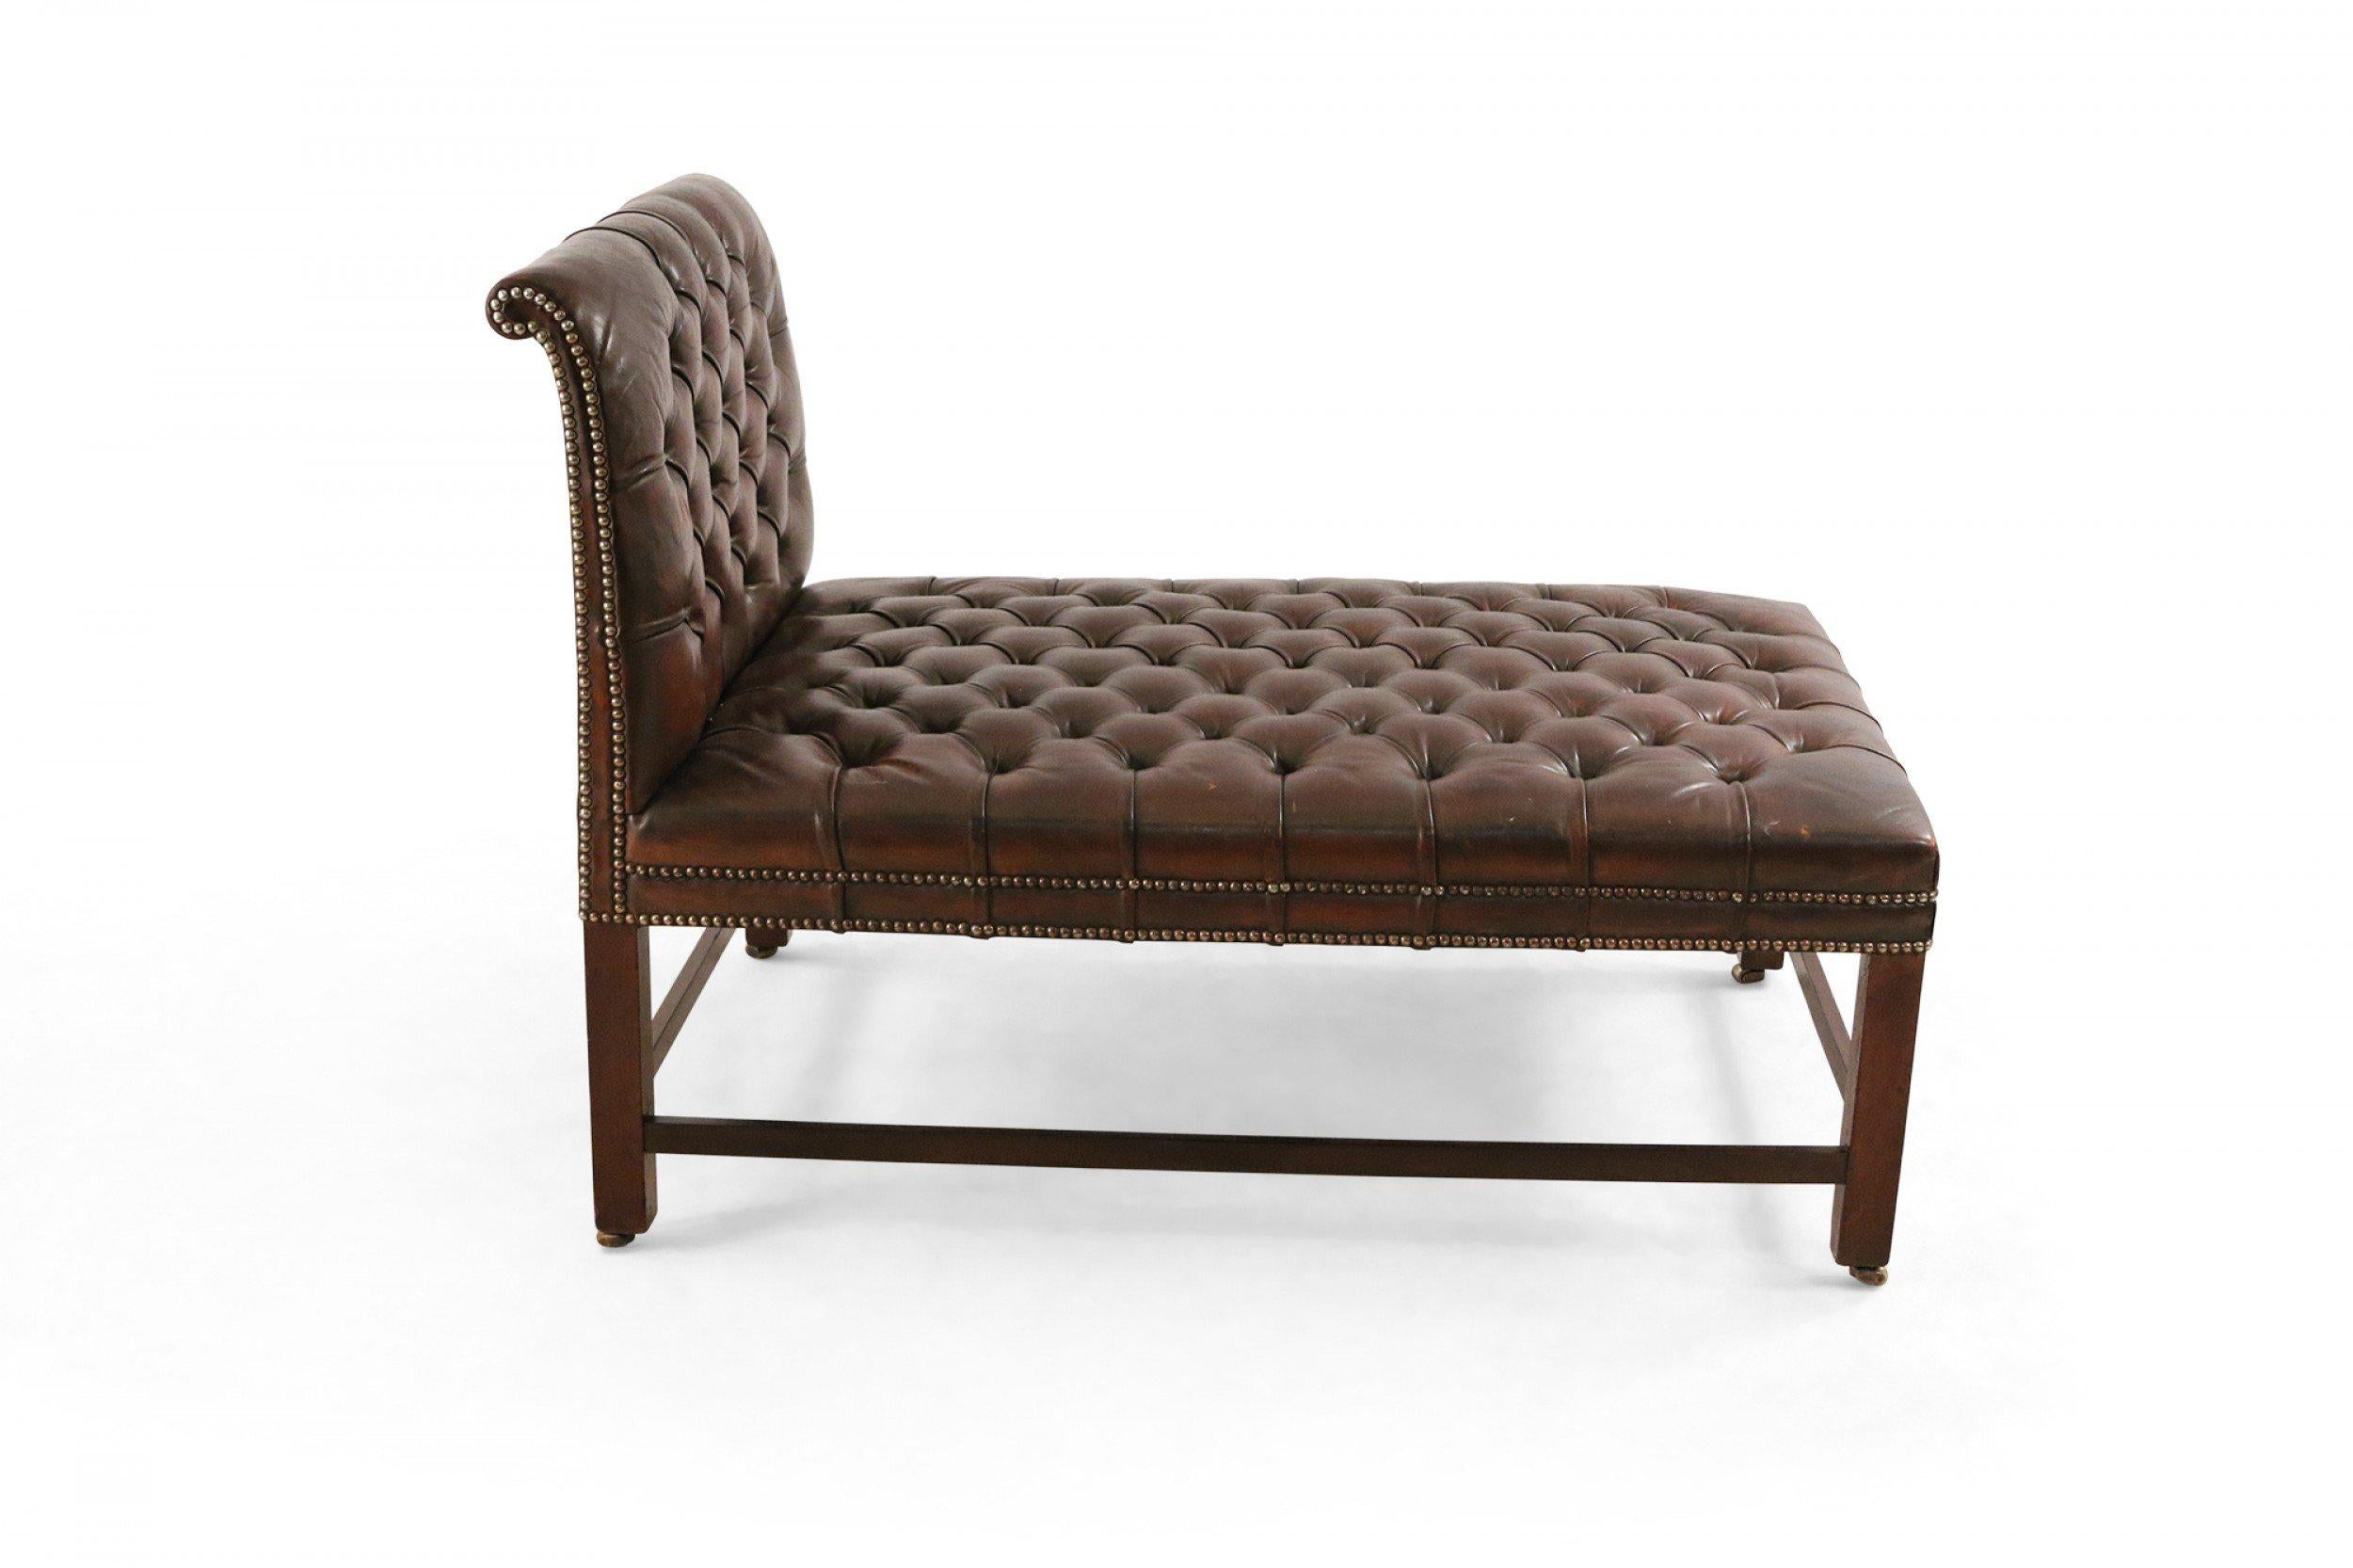 Mid-century dark brown leather psychiatrist's couch / chaise with button tufted upholstery, a backrest, and wooden frame legs.